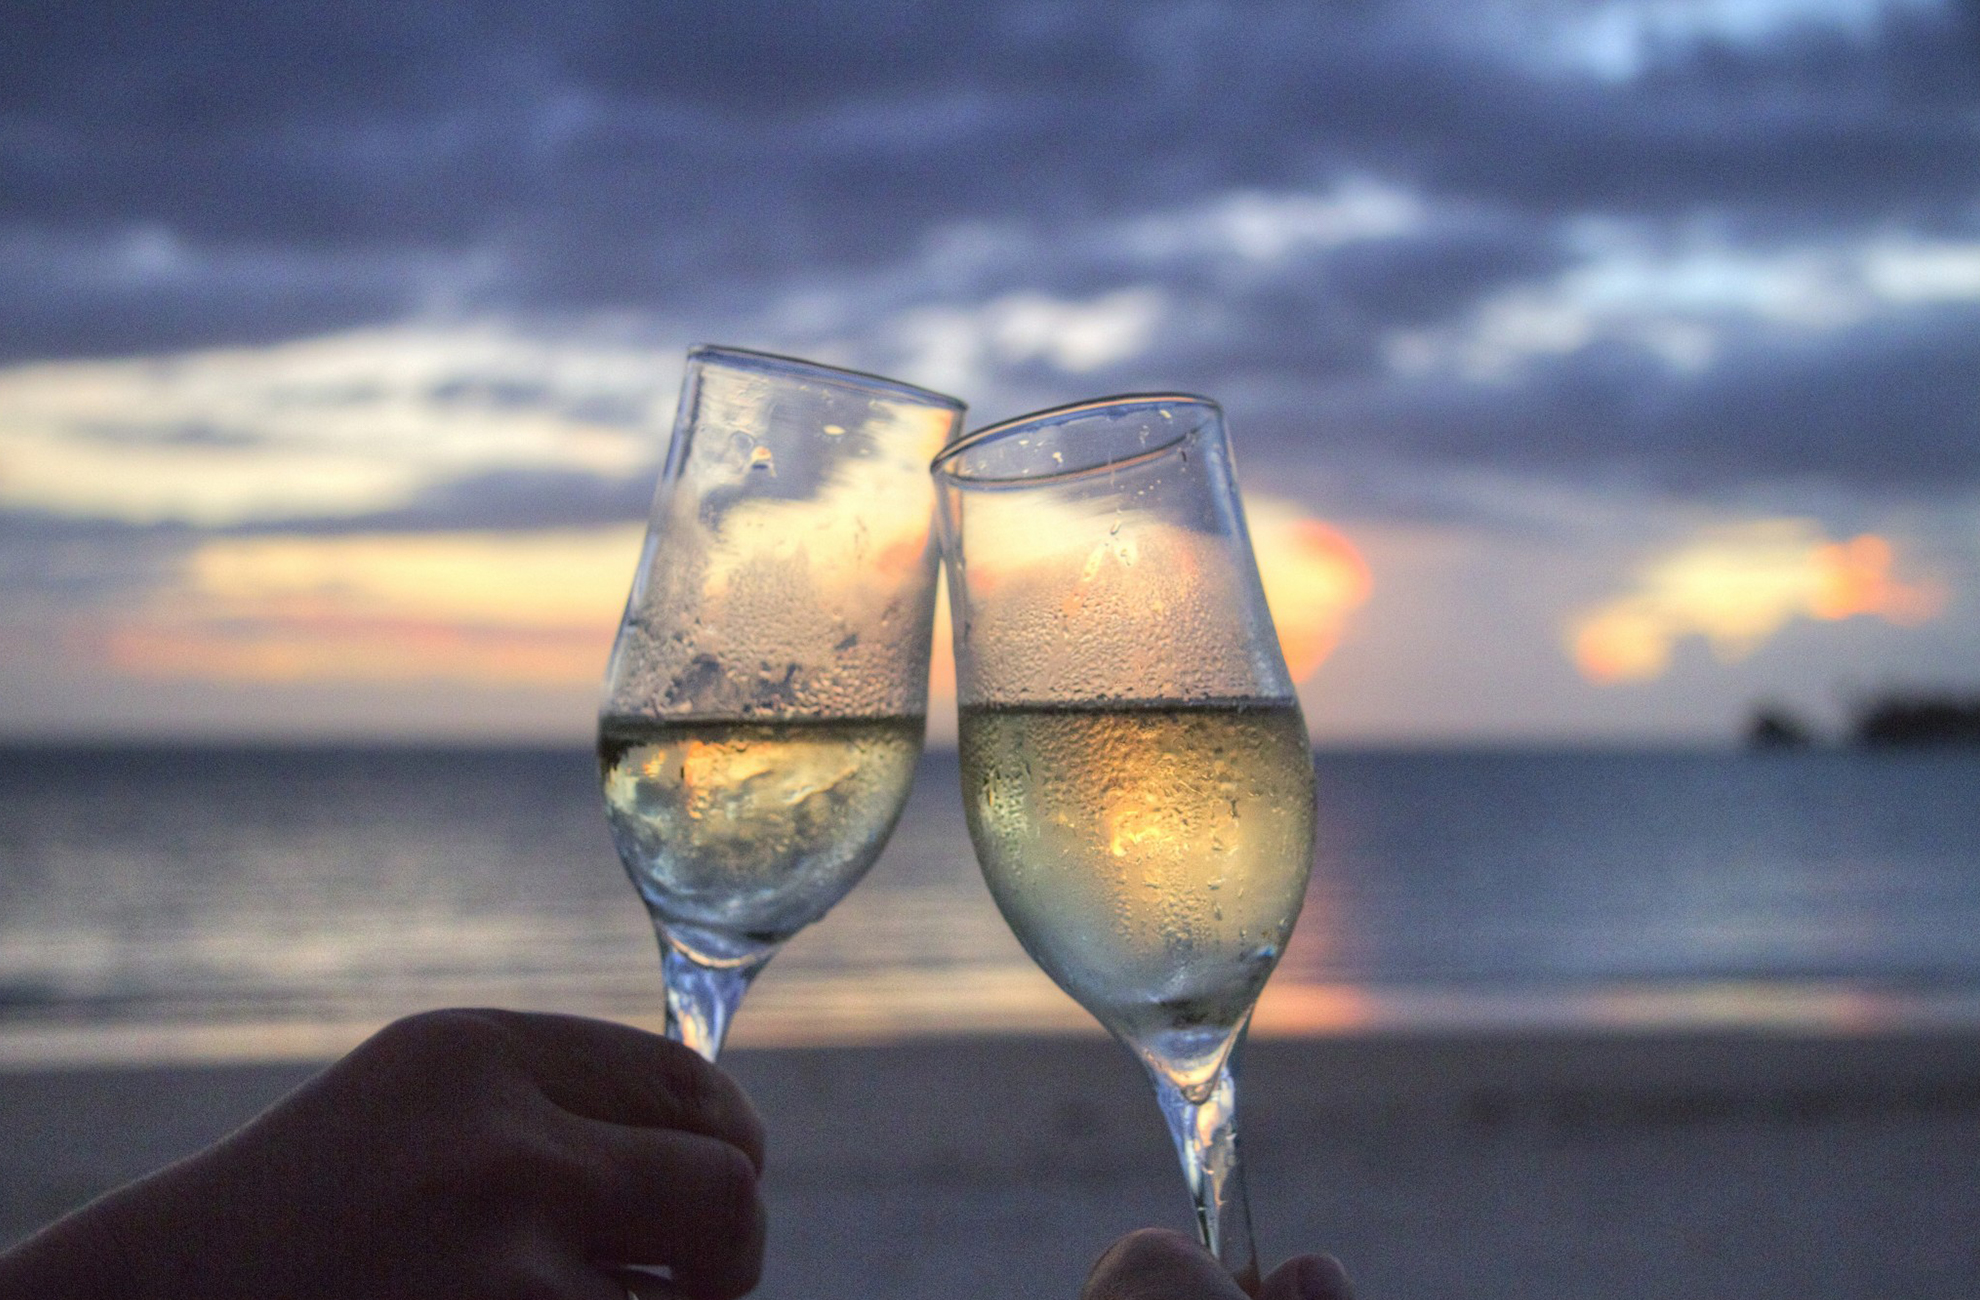 Enjoying a glass of fizz on the beach after the proposal